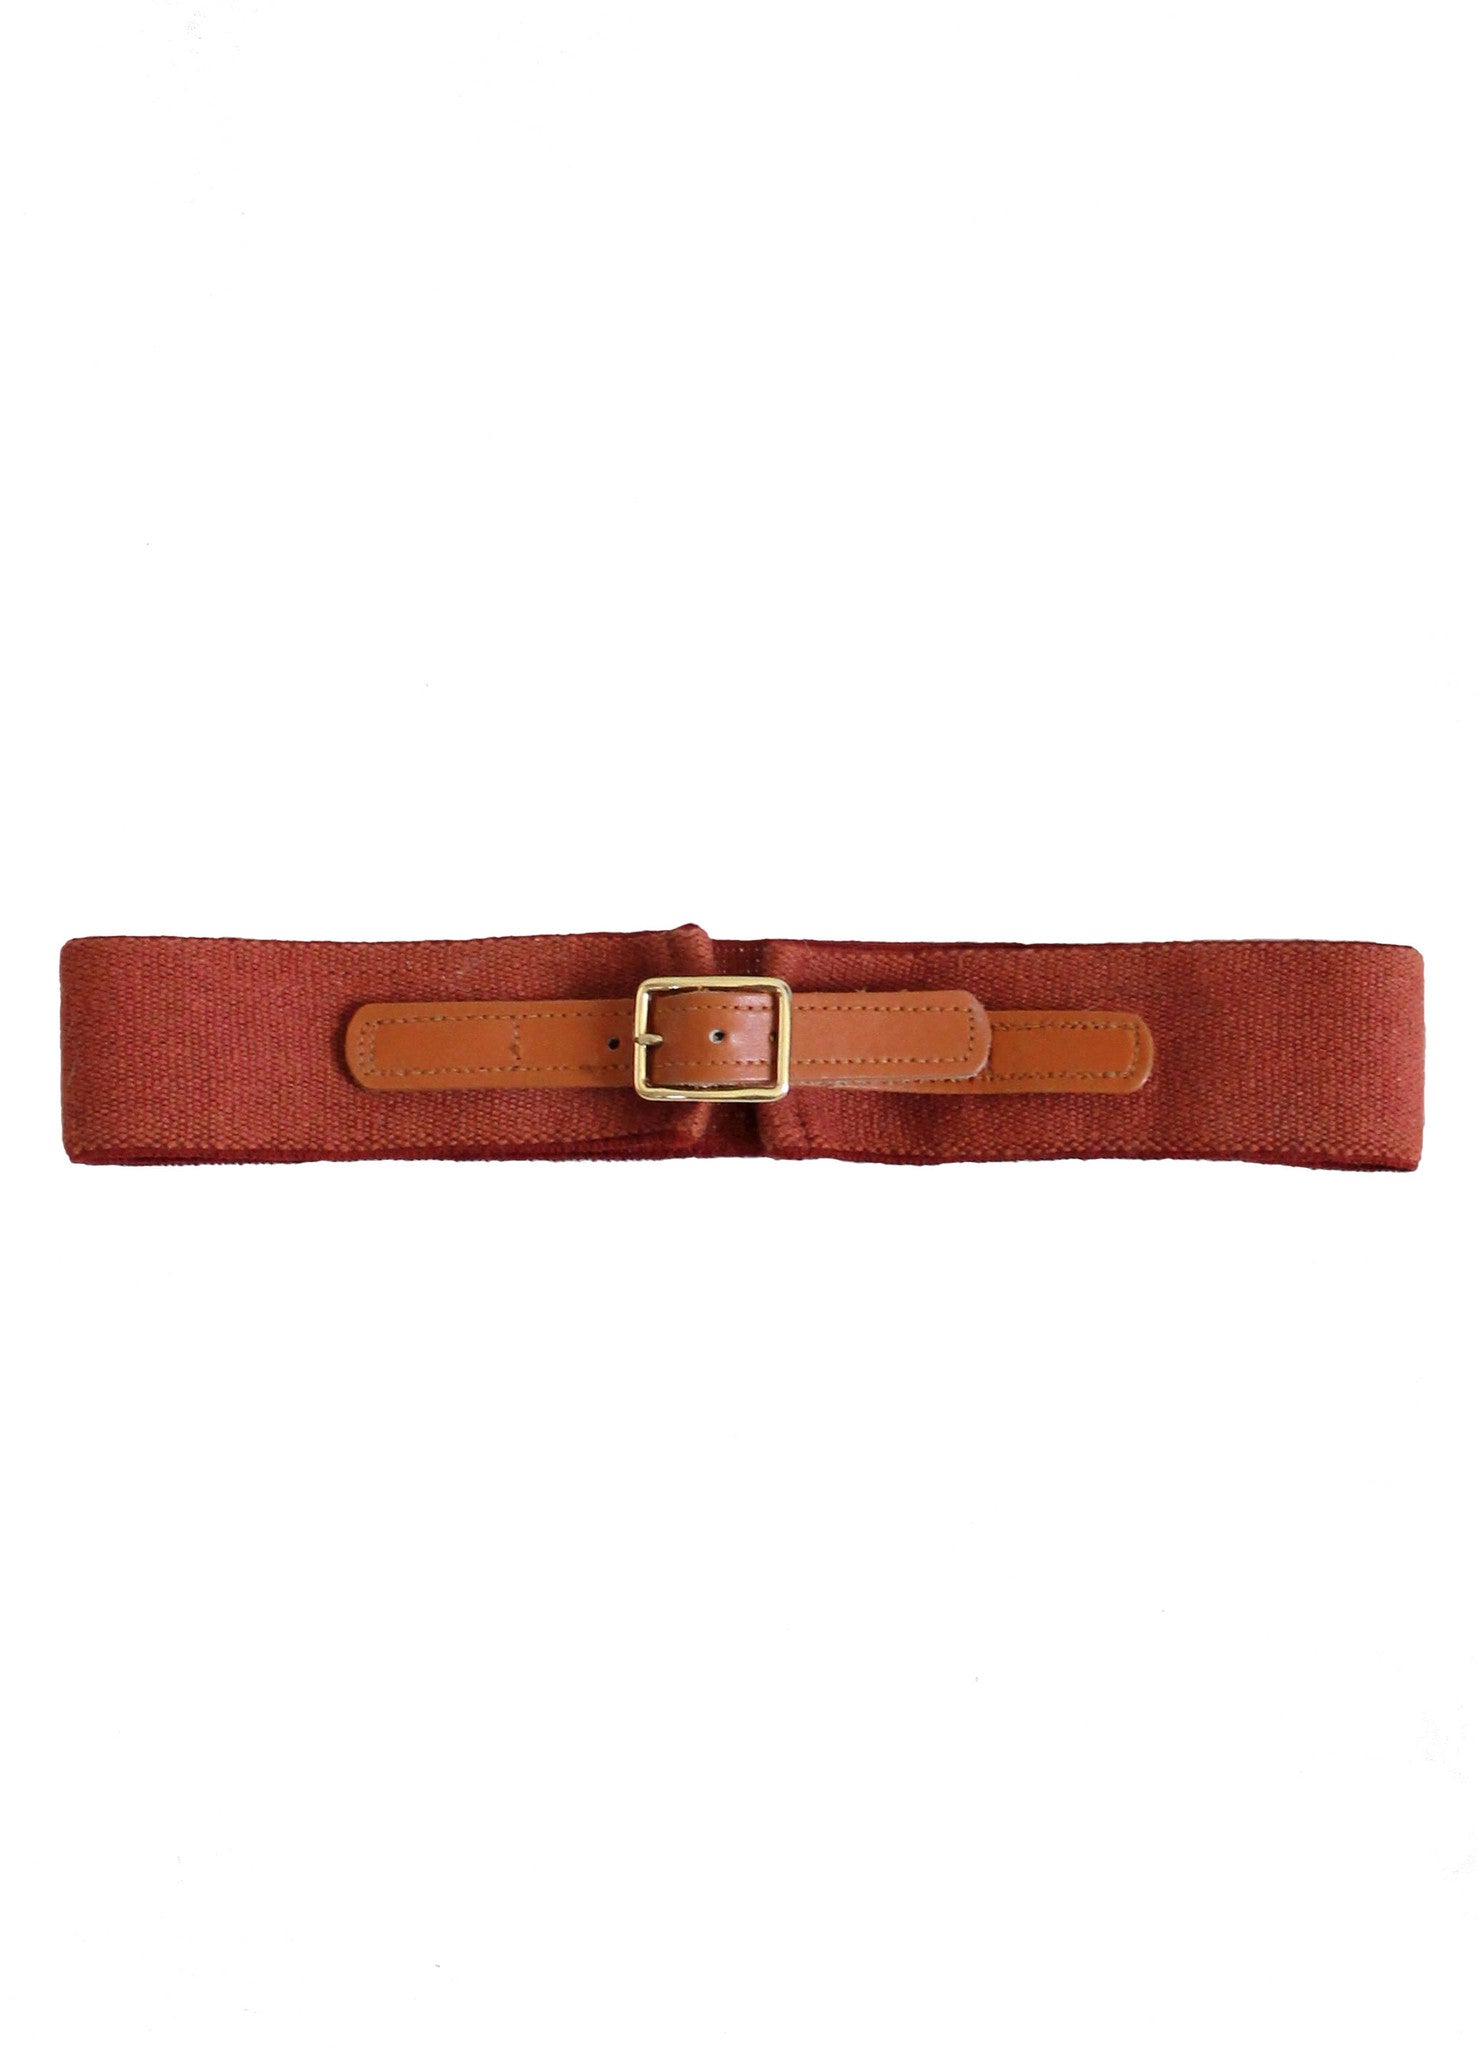 Vintage Brown Leather Corset Belt on White Background Stock Image - Image  of waist, style: 244860913